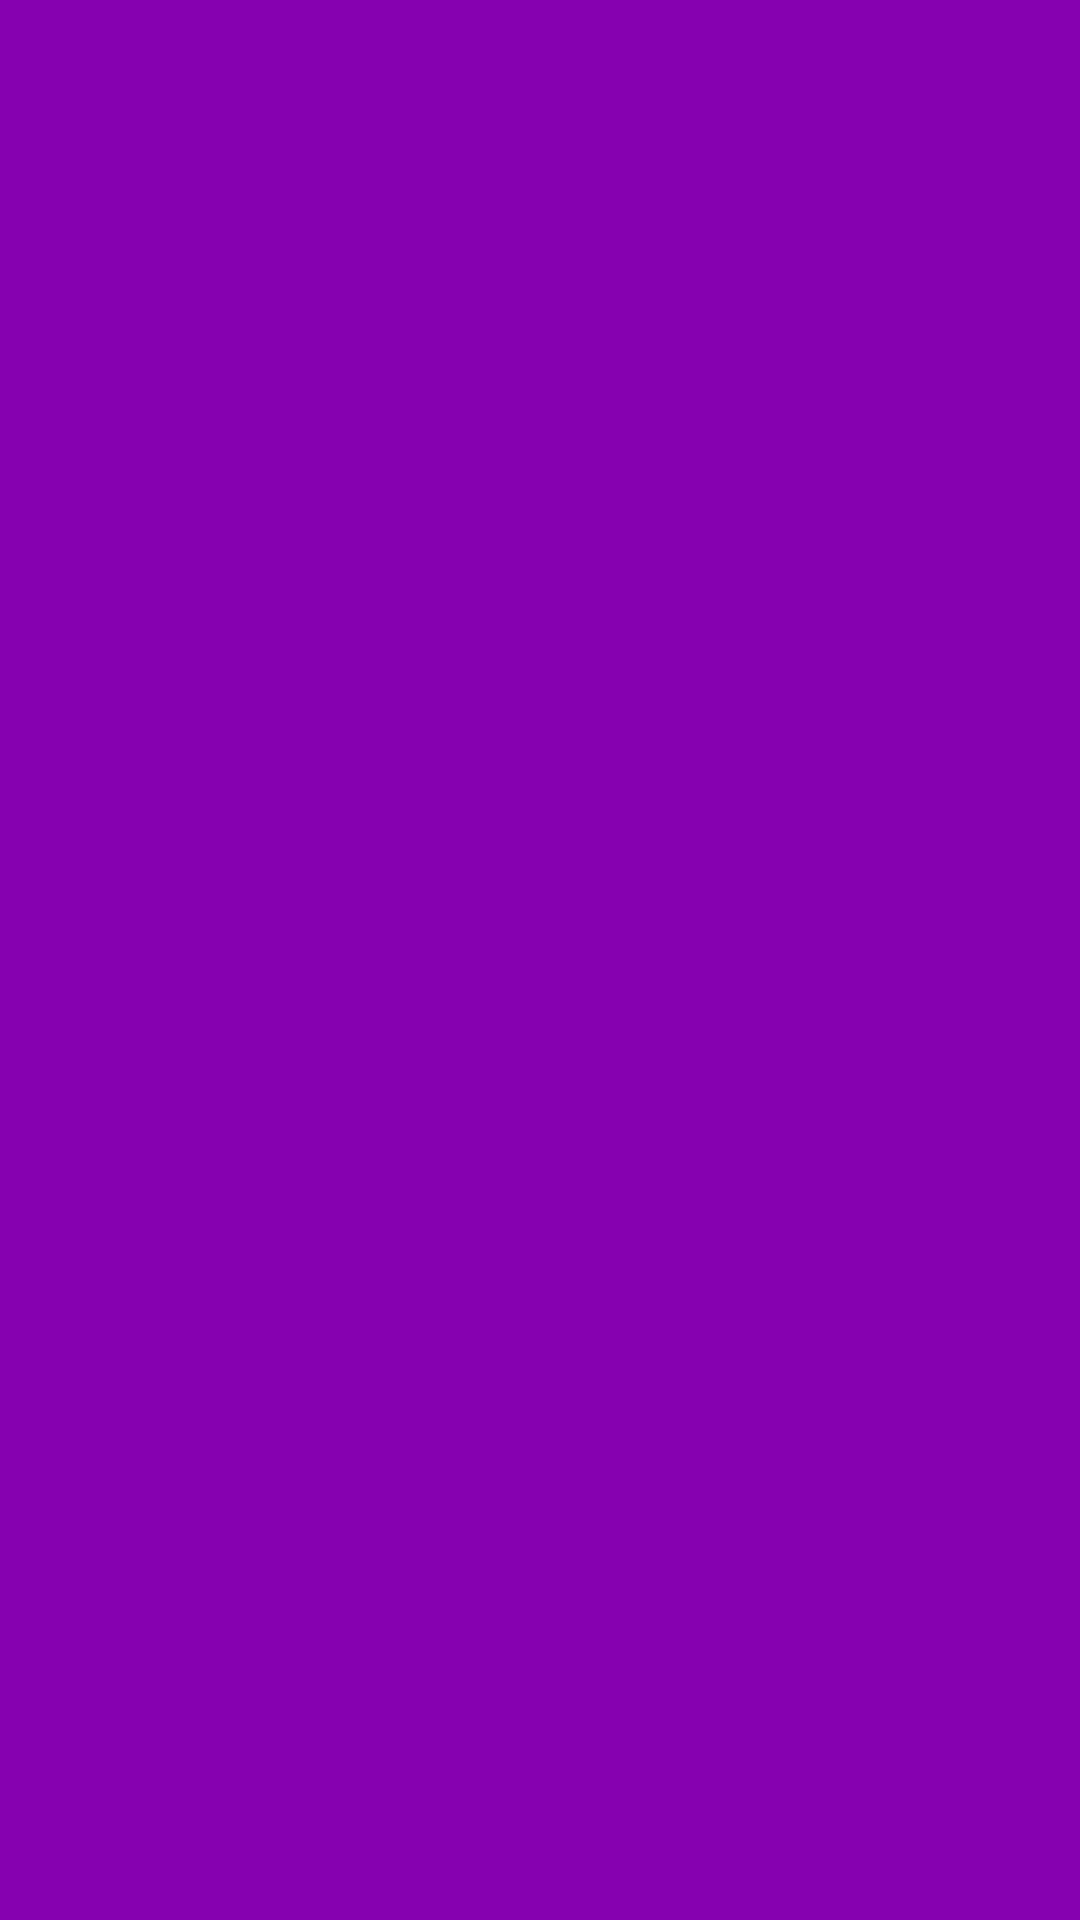 1080x1920 Violet RYB Solid Color Background